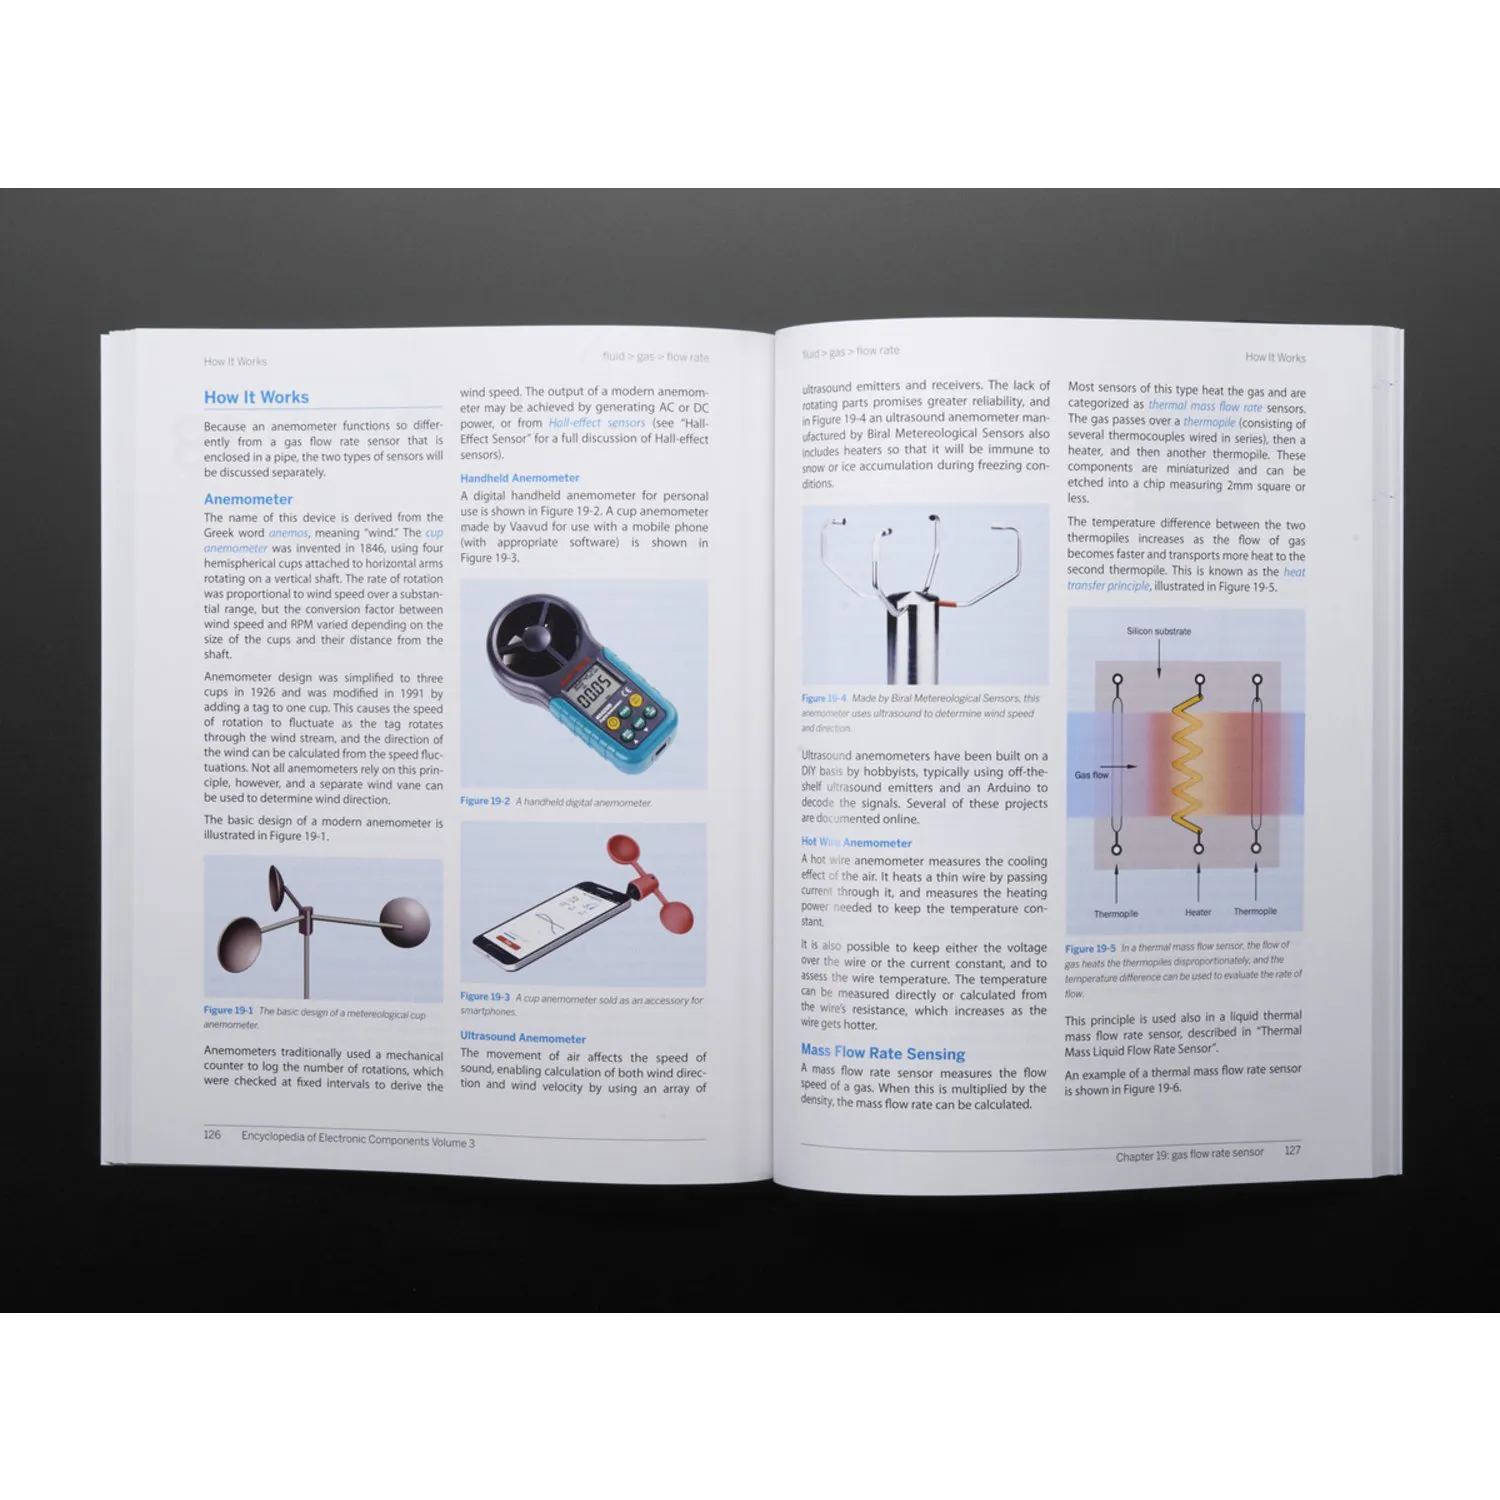 Photo of Encyclopedia of Electronic Components Volume 3